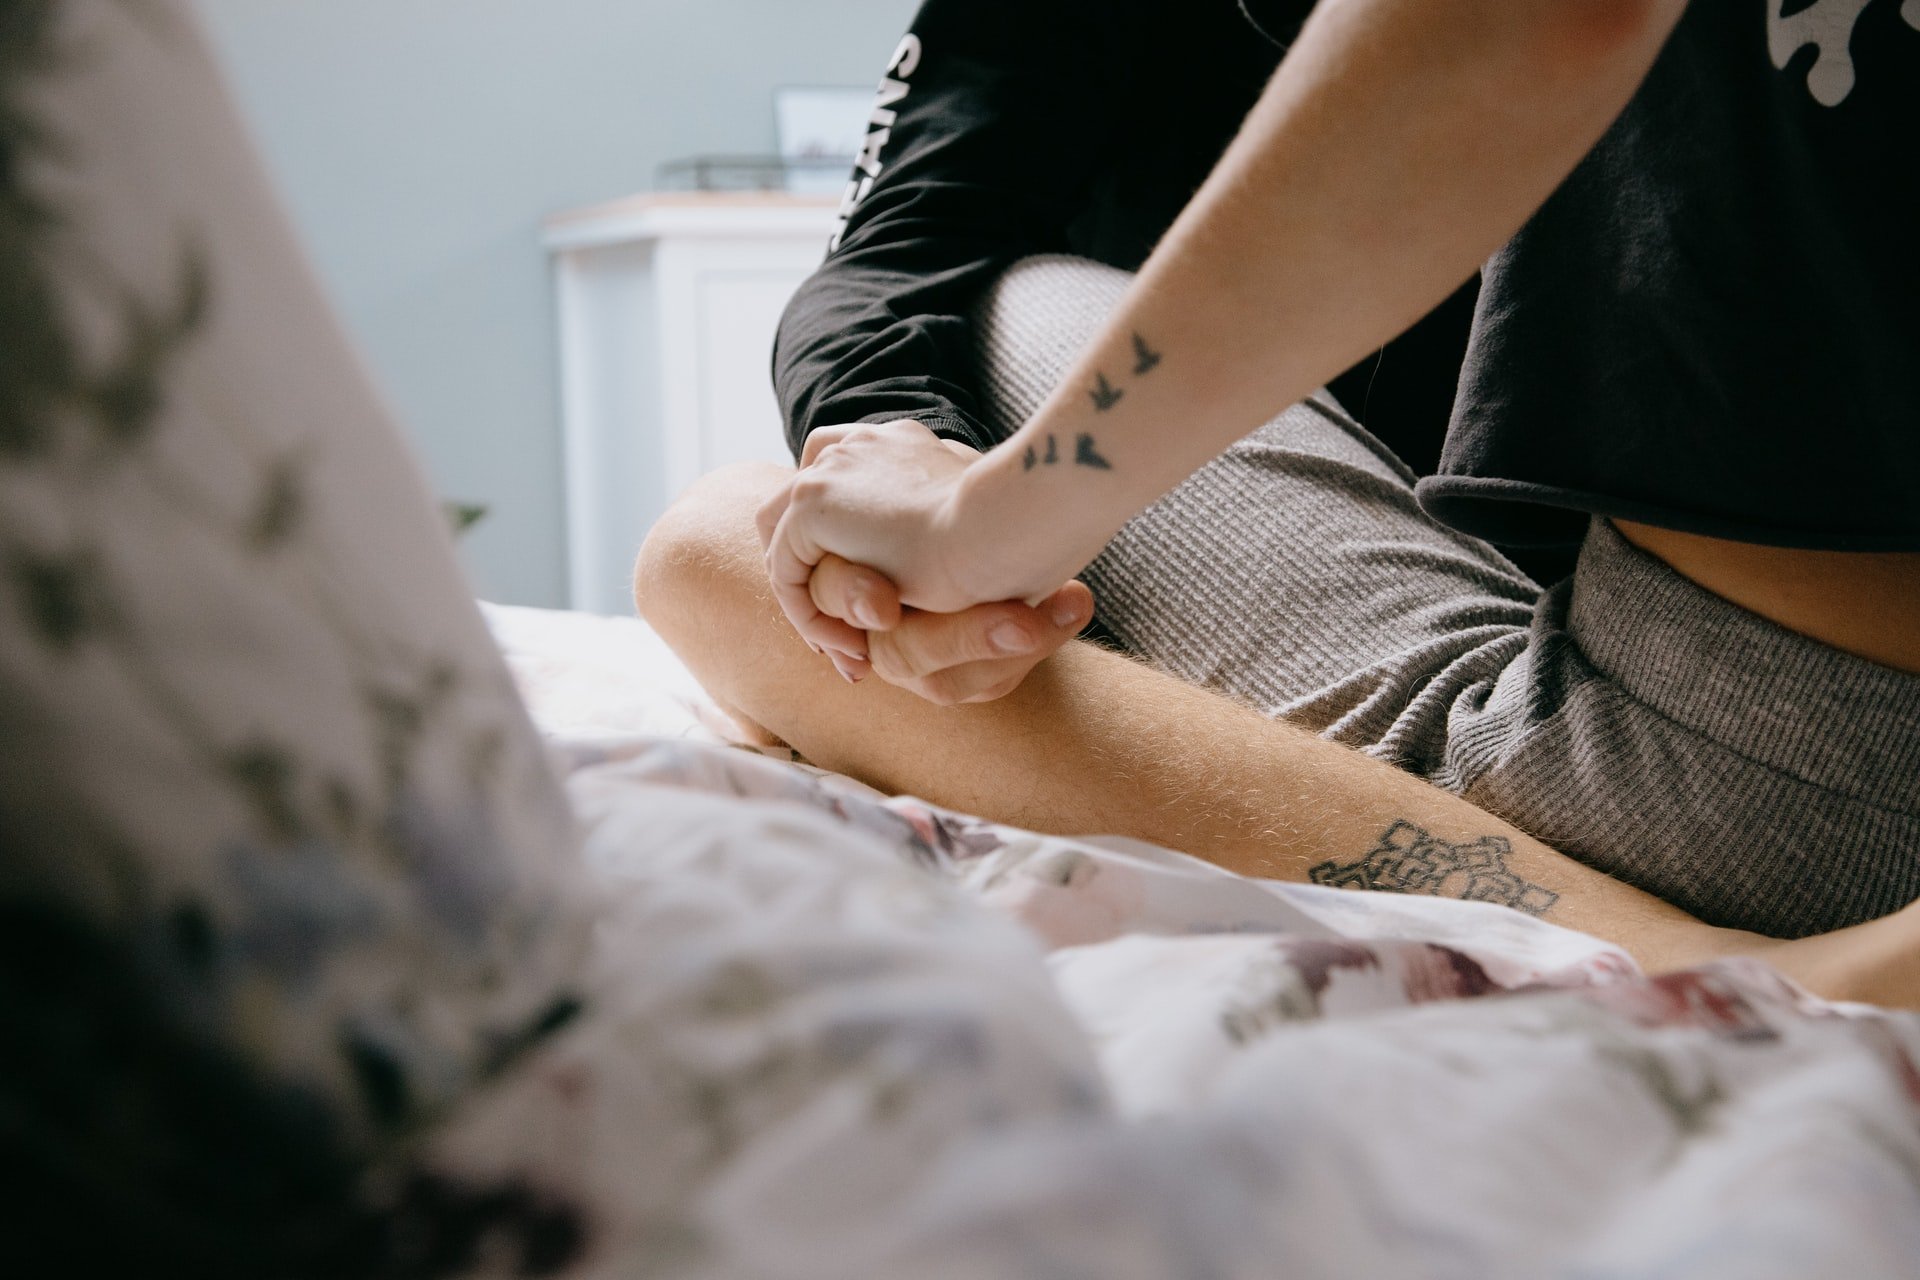 Couple sitting on bed holding hands | Source: Unsplash